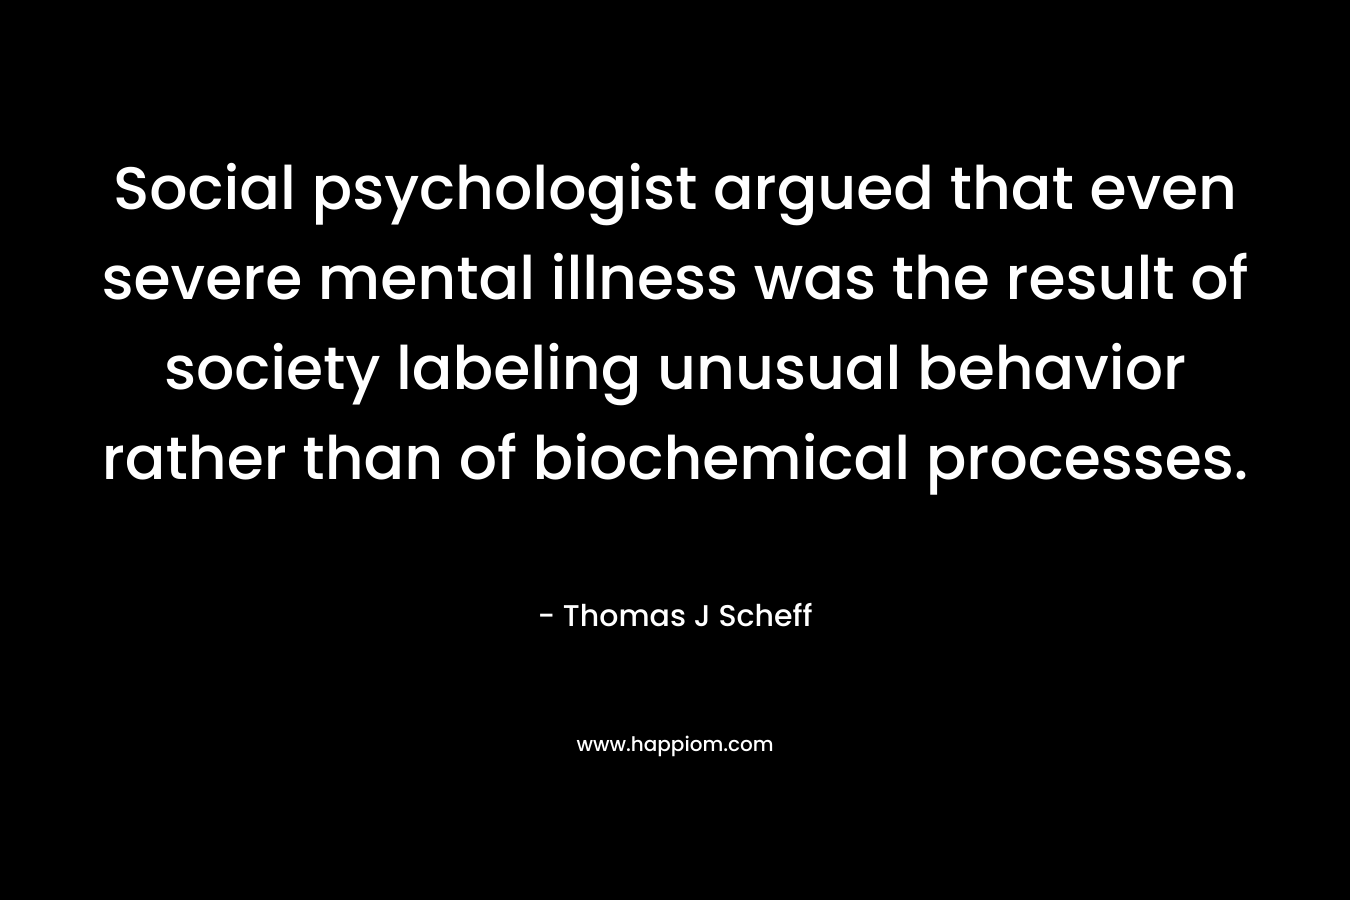 Social psychologist argued that even severe mental illness was the result of society labeling unusual behavior rather than of biochemical processes. – Thomas J Scheff